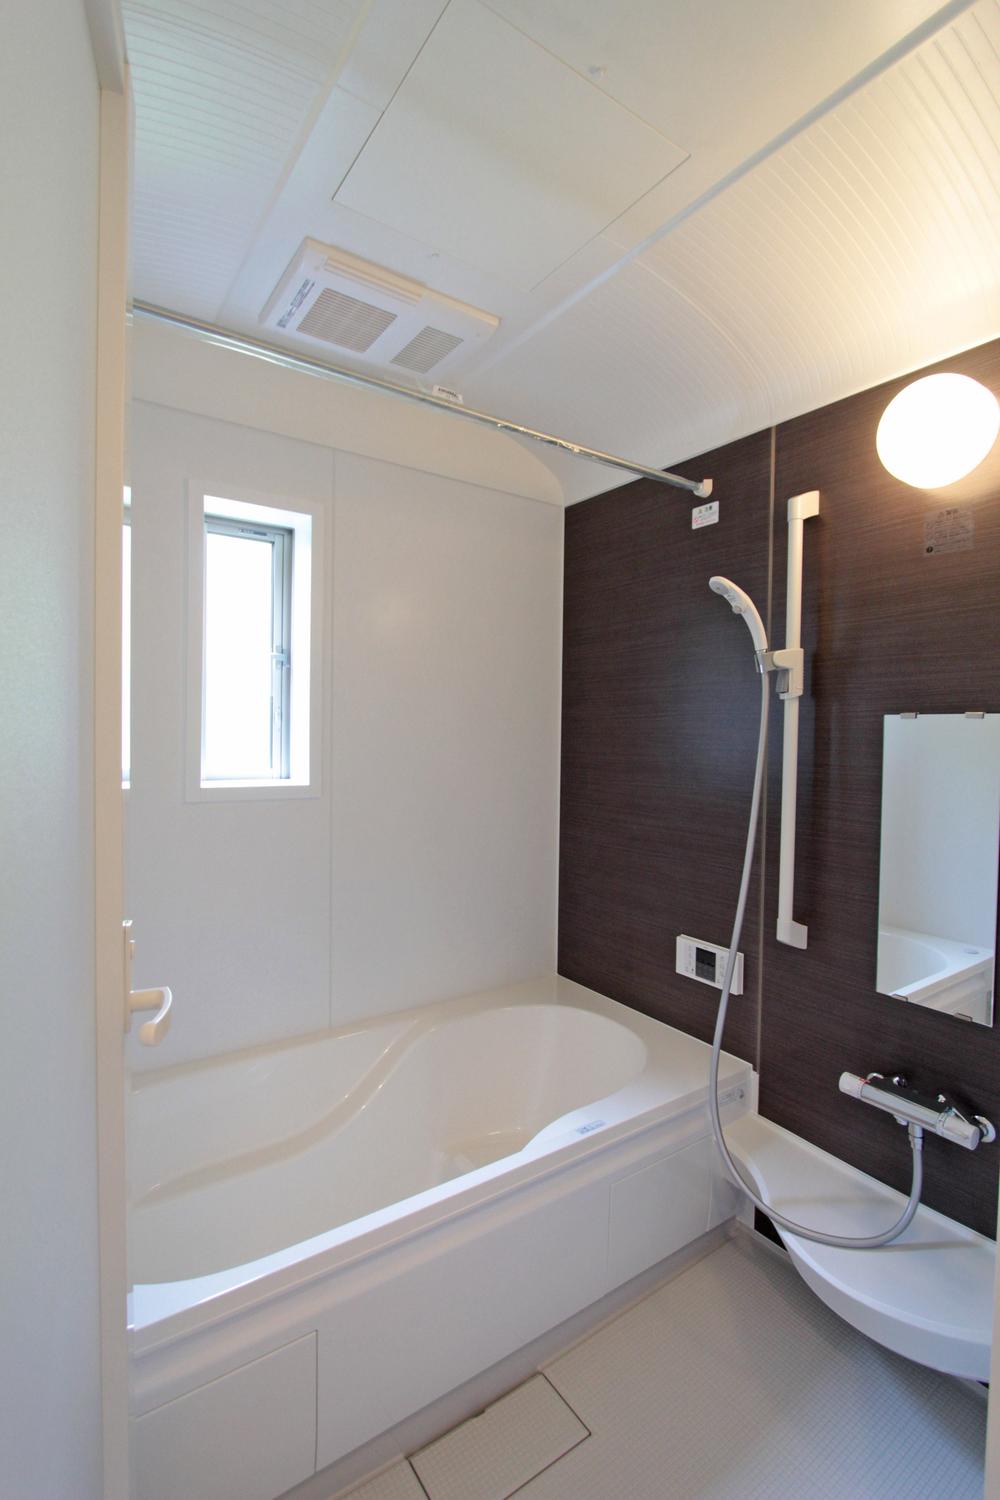 Same specifications photo (bathroom). Interior construction results